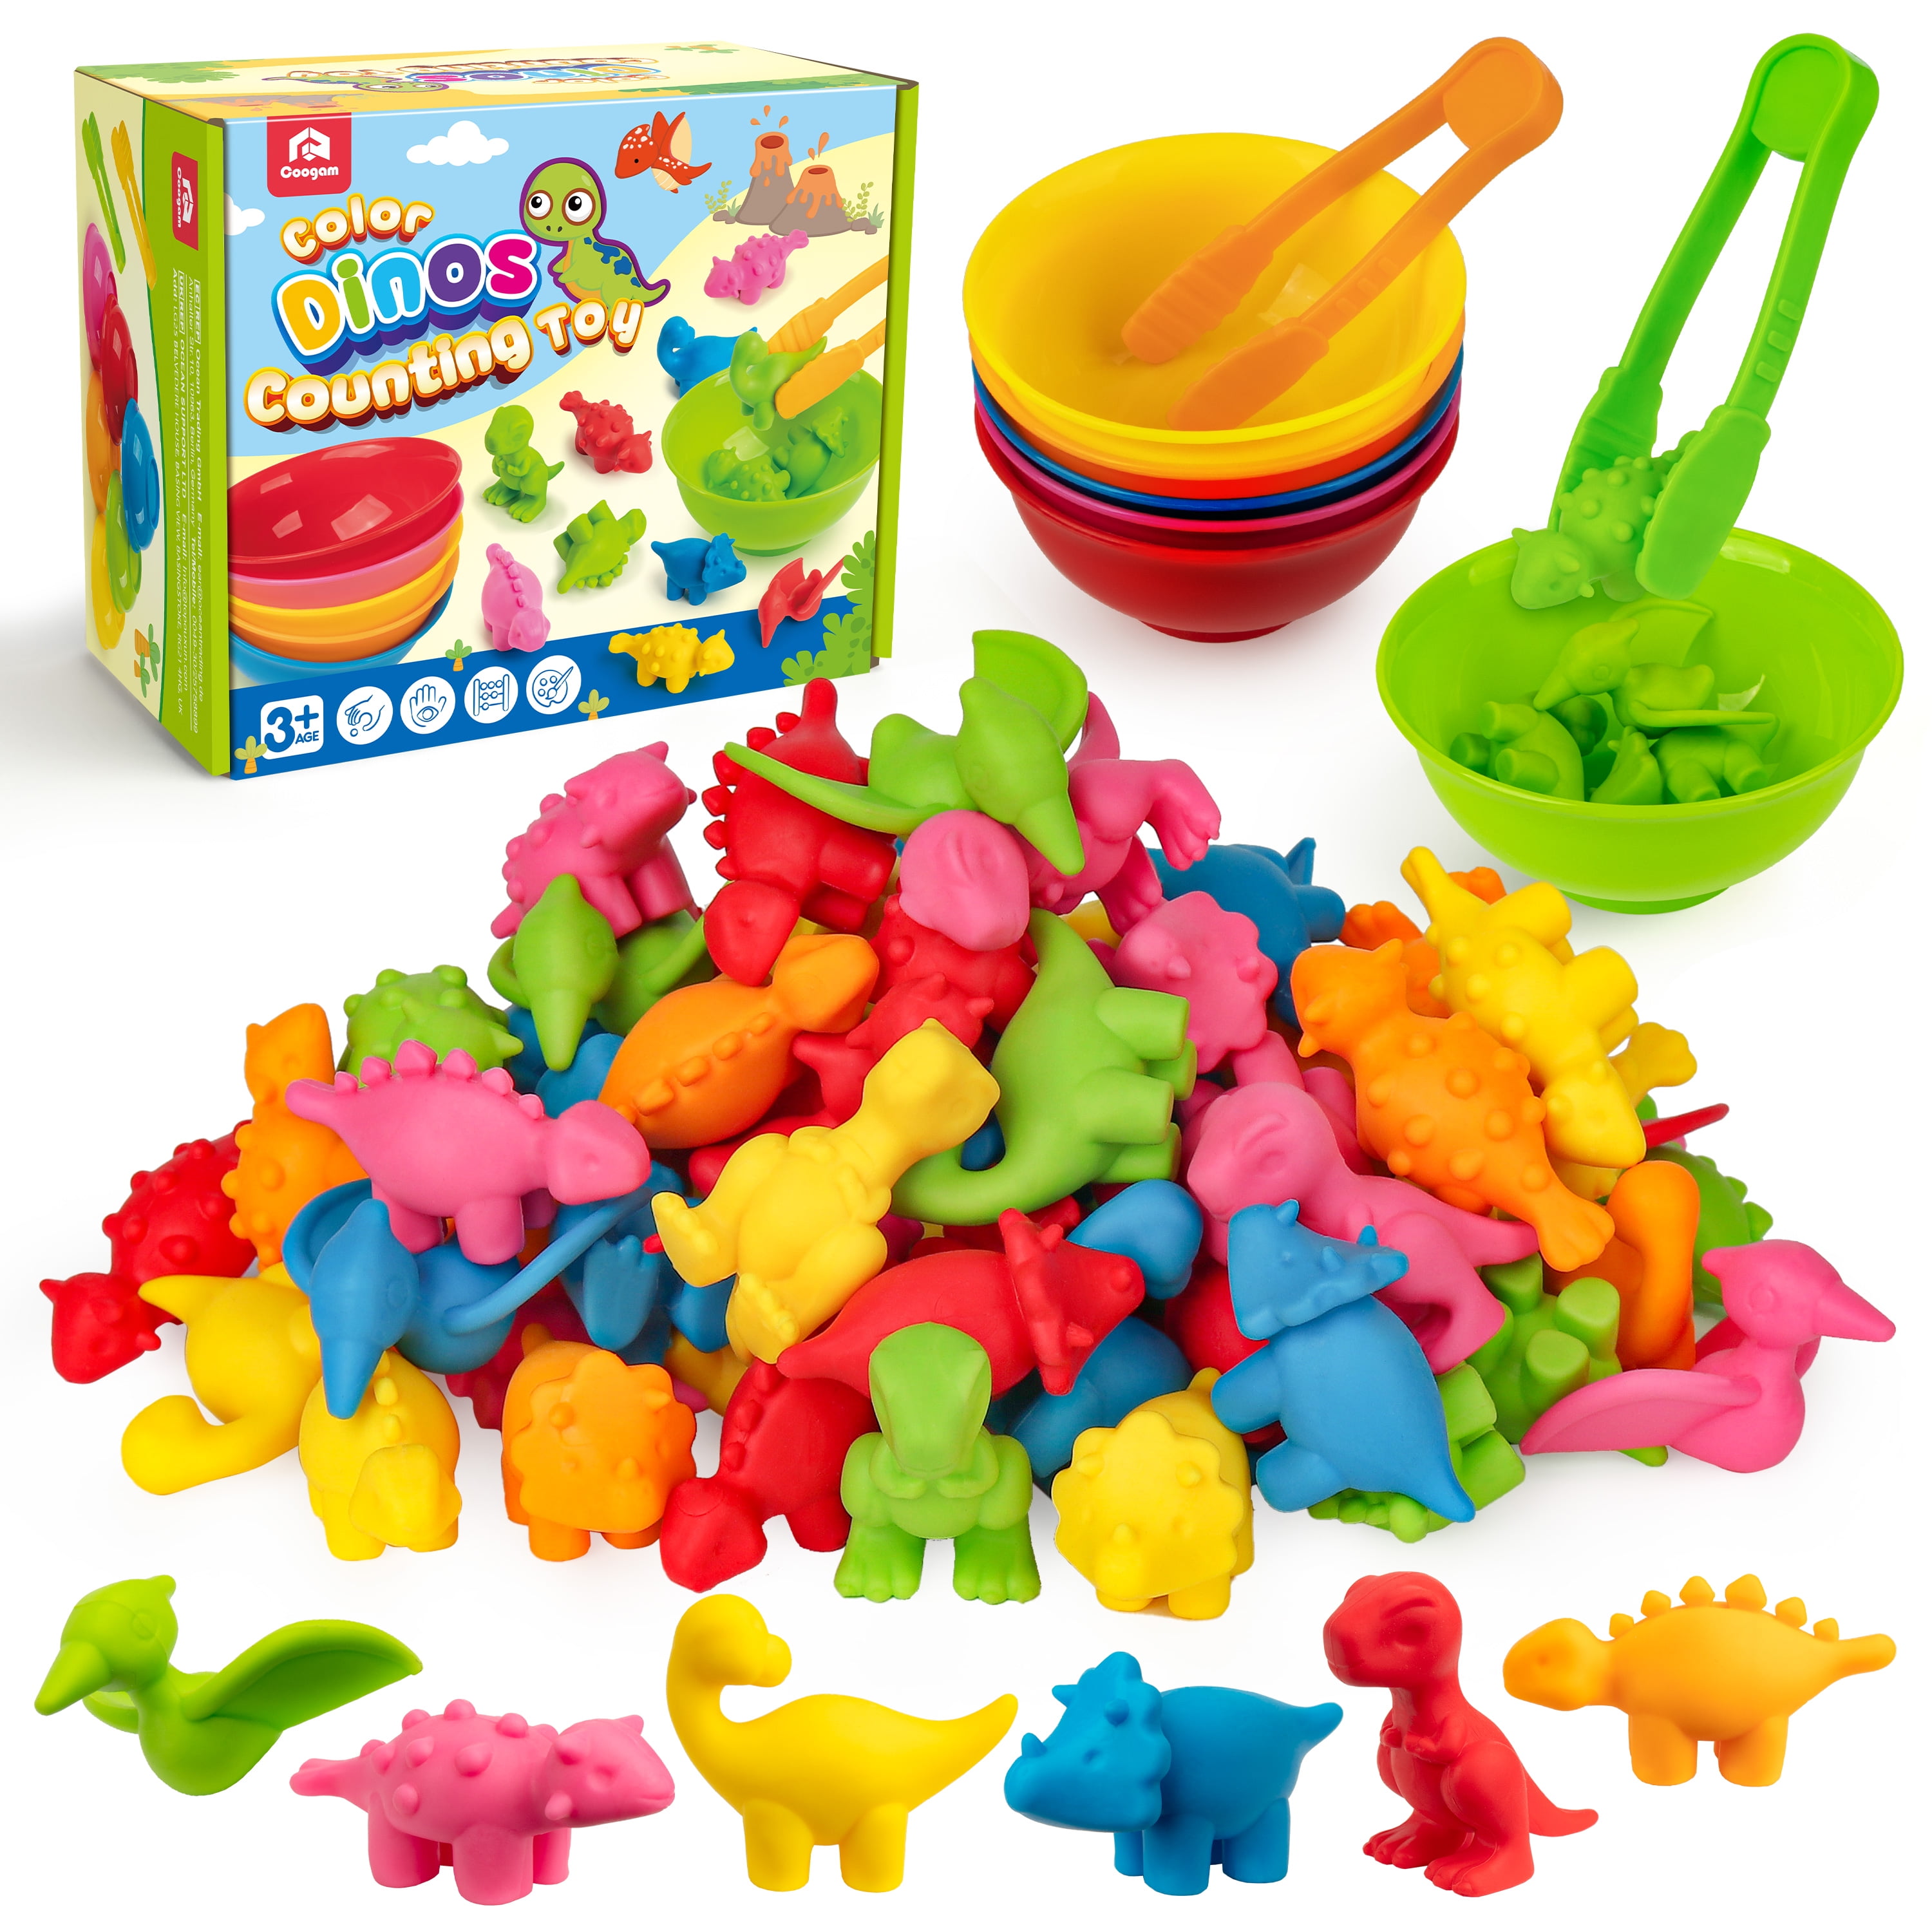 Fisher-Price® Linkimals™ 1-20 Count Whale Quiz Toy, 1 ct - Fry's Food Stores